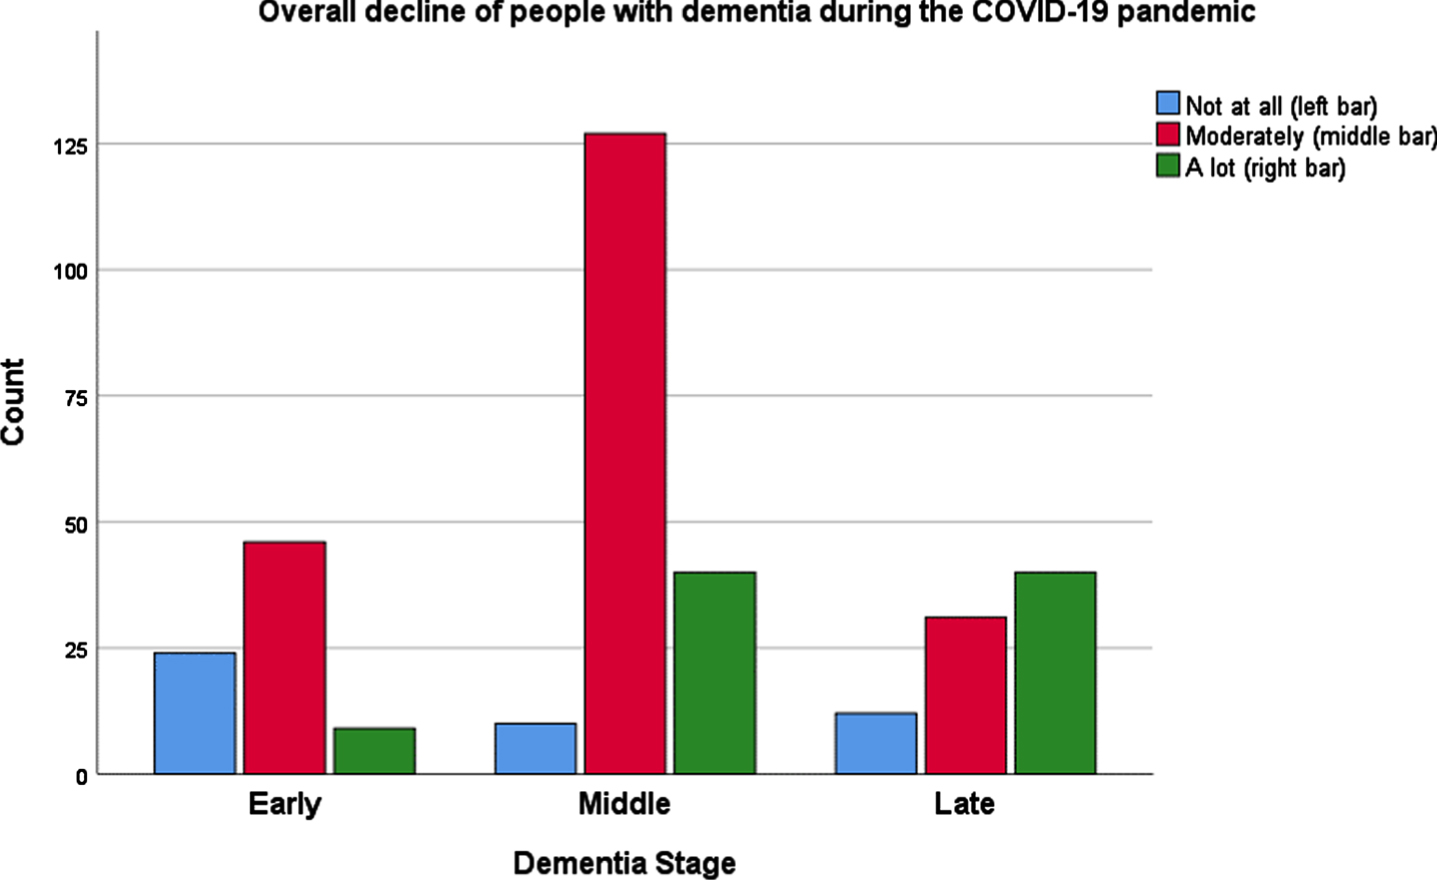 Overall decline of people suffering from dementia during the COVID-19 pandemic, in three different stages of dementia.